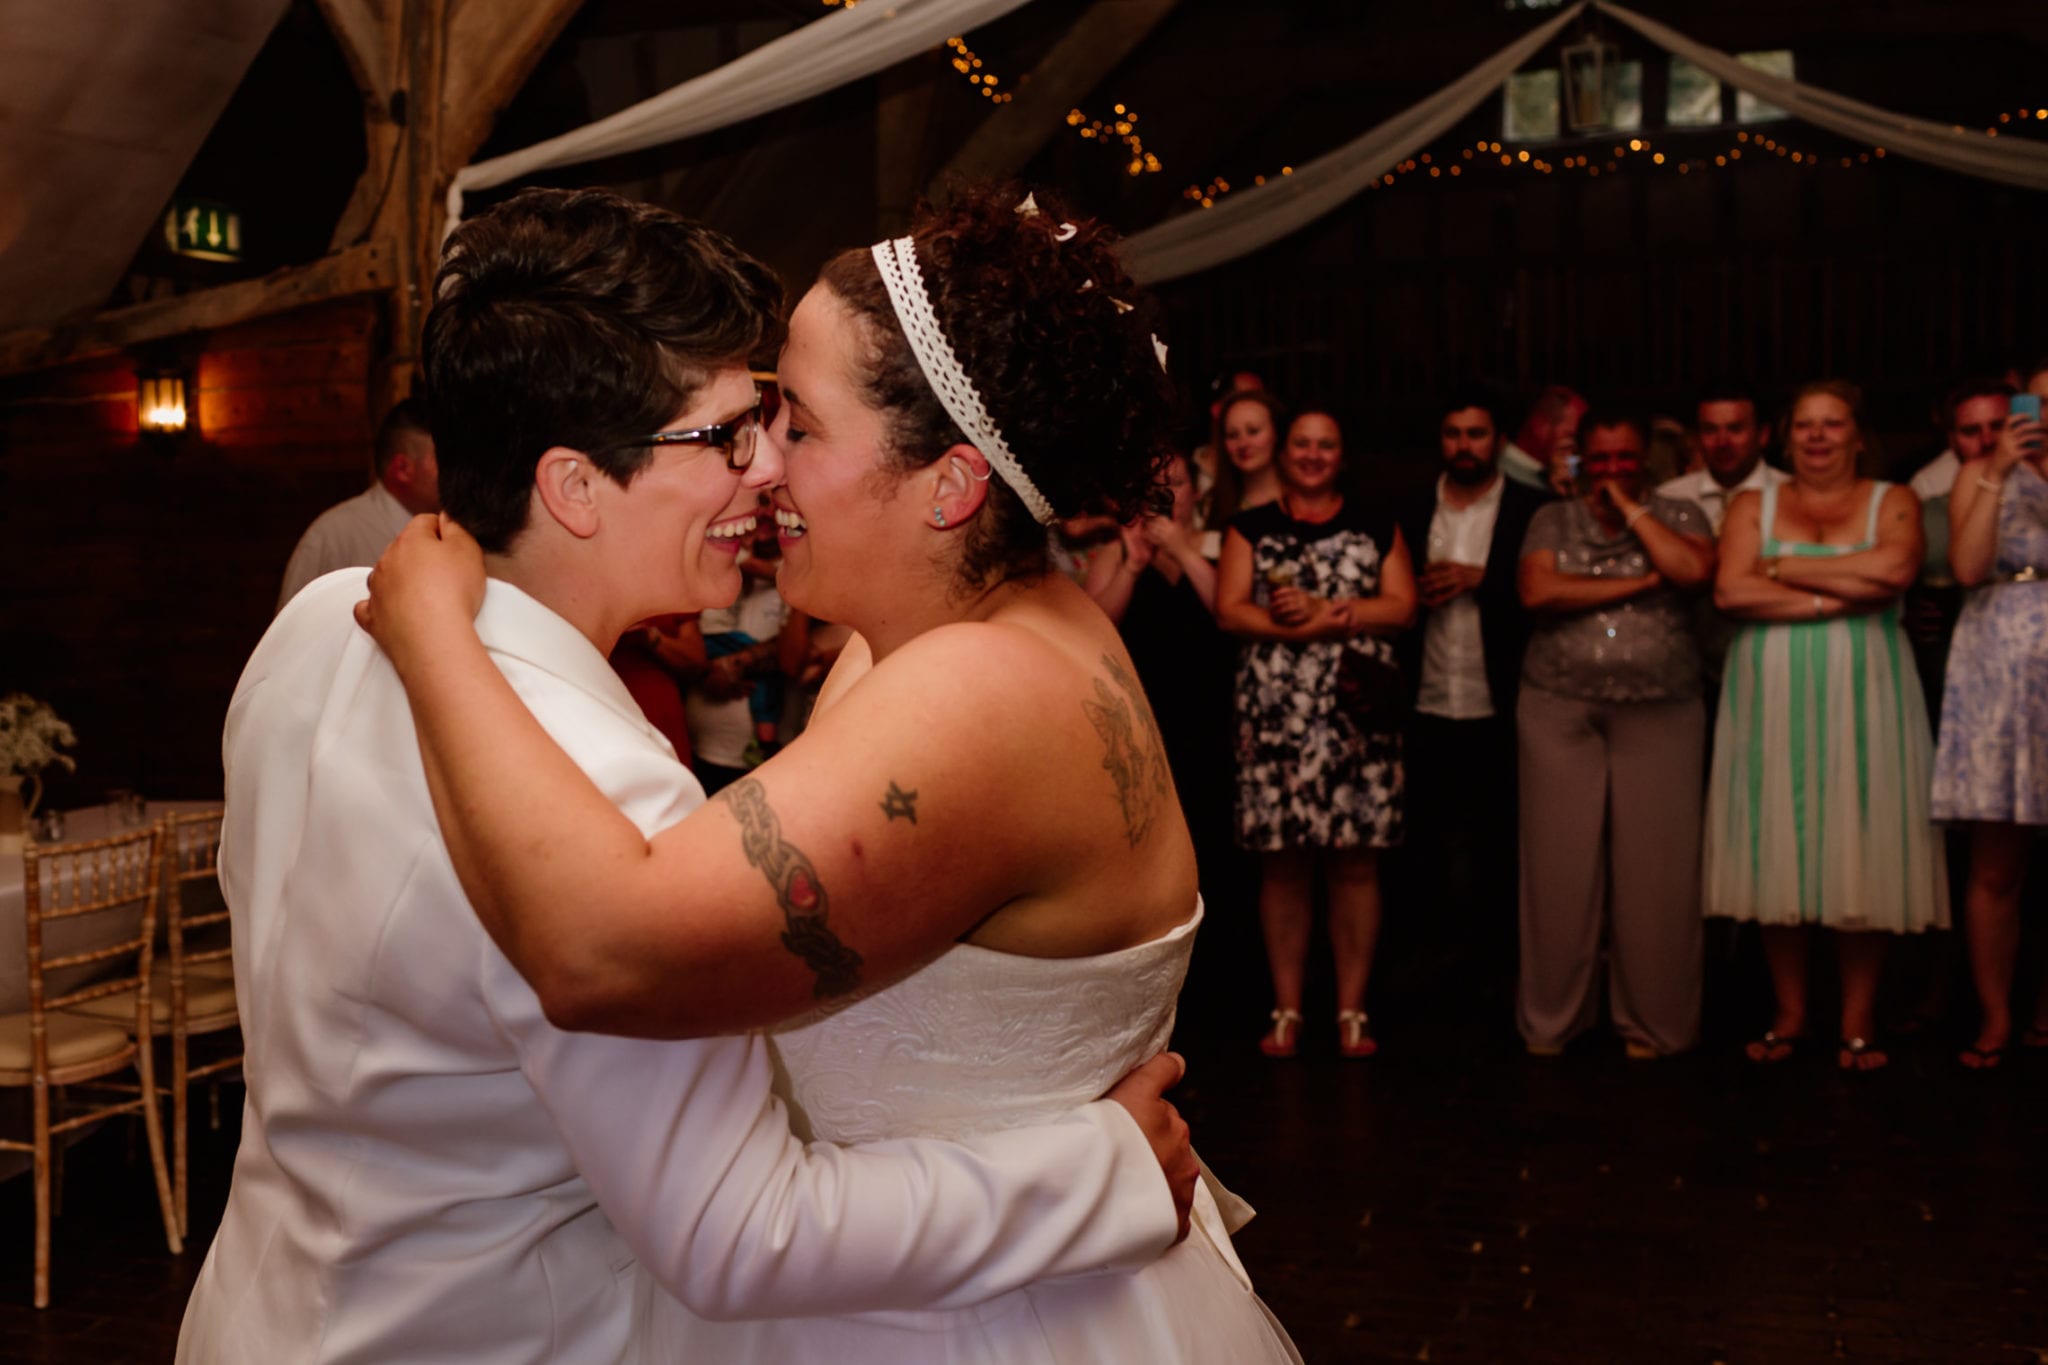 Laughing during two brides first dance at their wedding